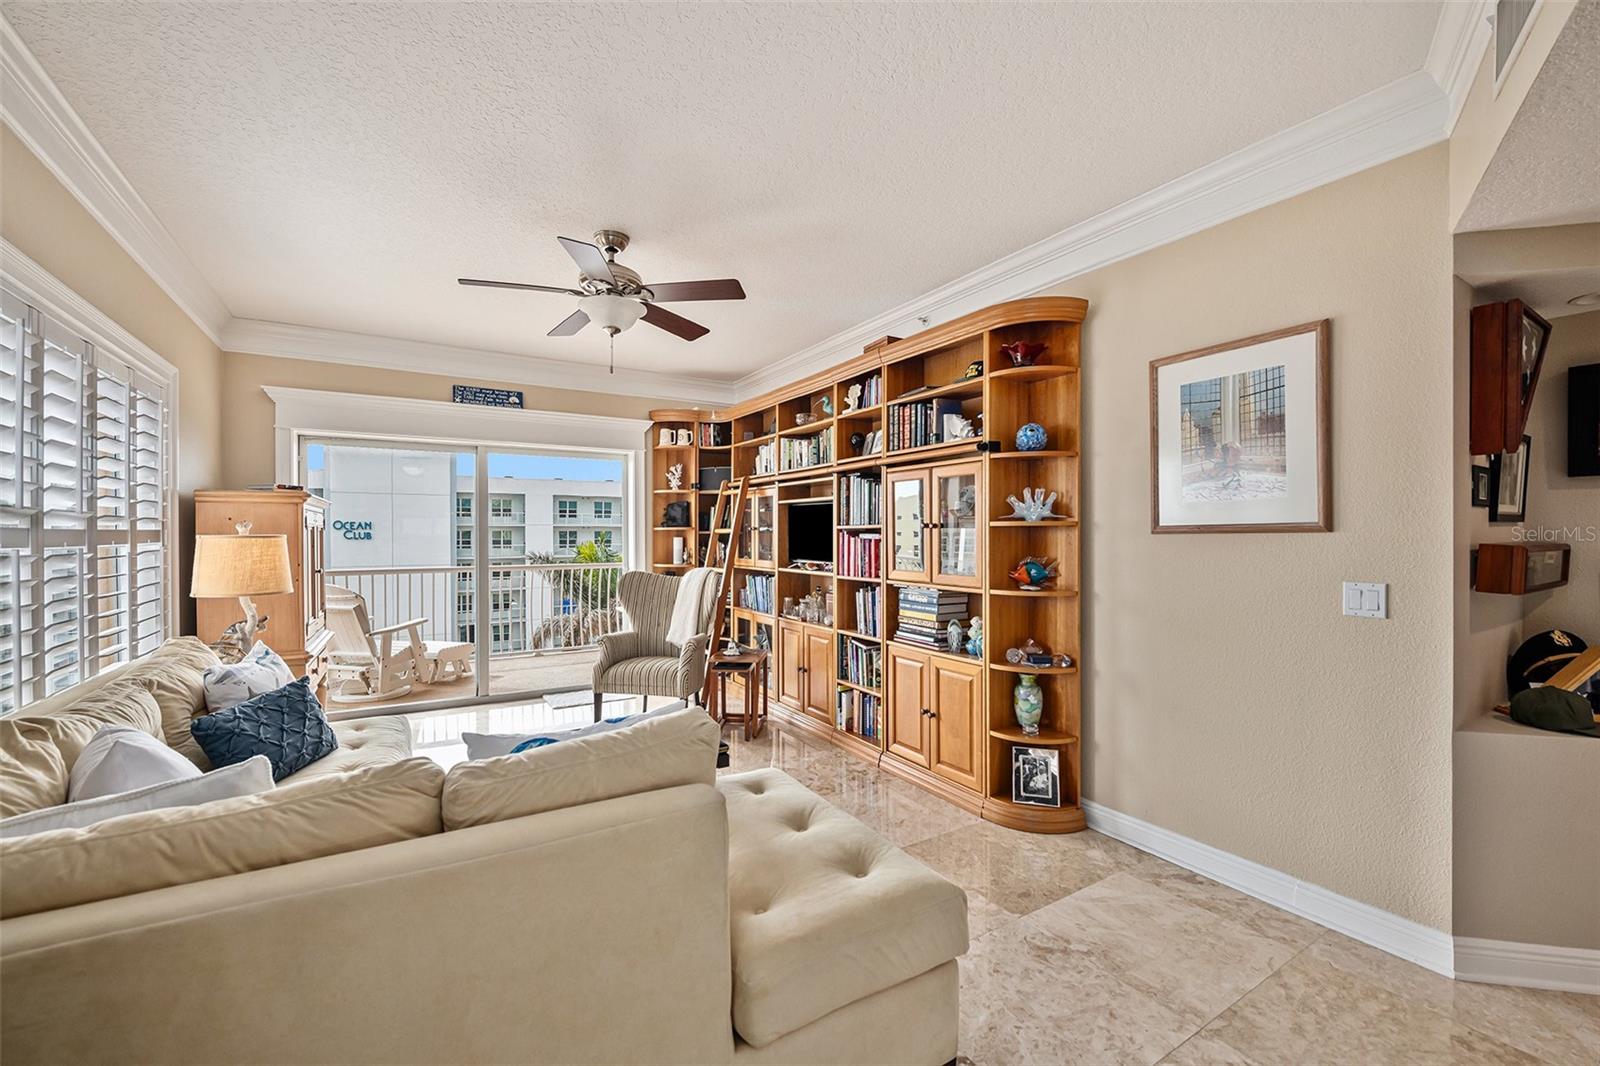 Exceptional crown molding, plantation shutters, luxury appointments and more define this condo.  Spacious Family Room offers additional space for guests and more!